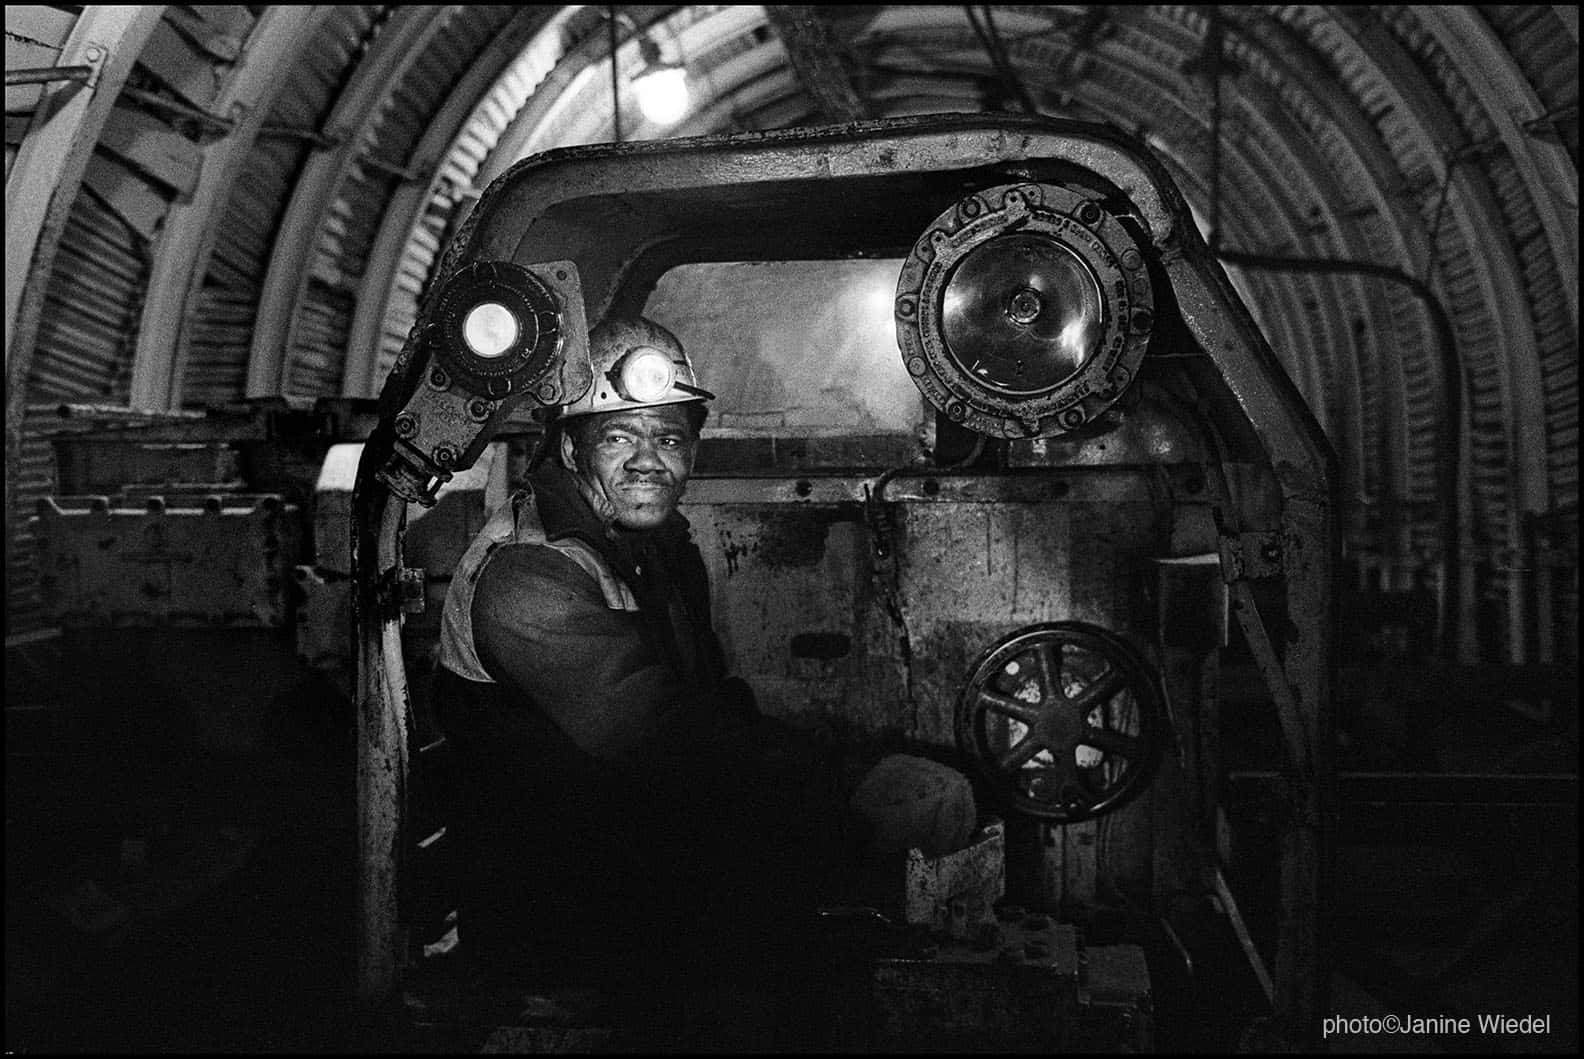 Coalmining at Littleton Colliery, The West Midlands UK 1977